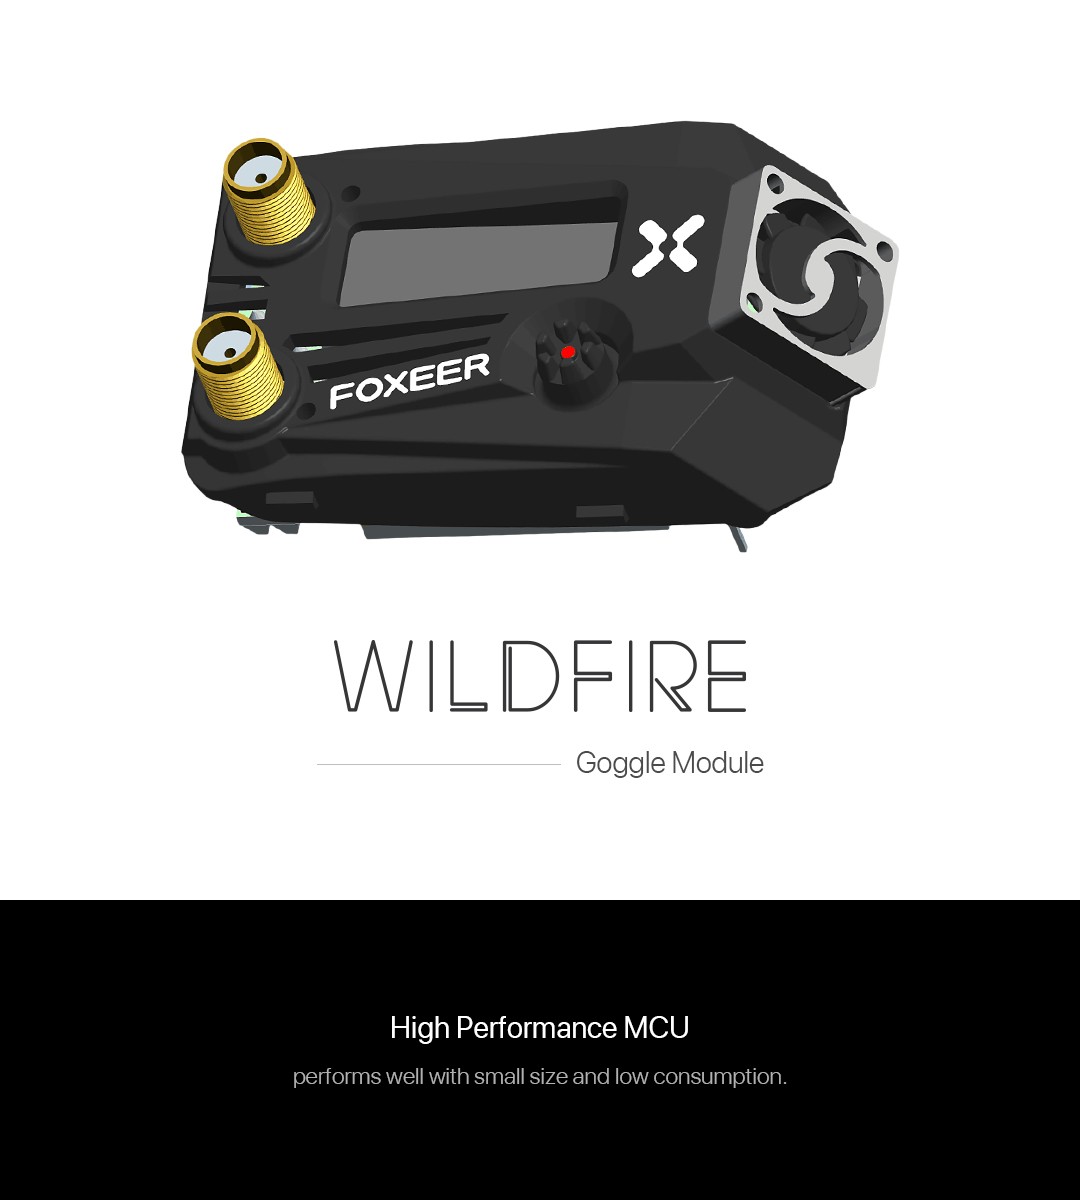 Foxeer Wildfire 5.8G Goggle Dual Video Receiver Module (Pick Your Color) 7 - Foxeer